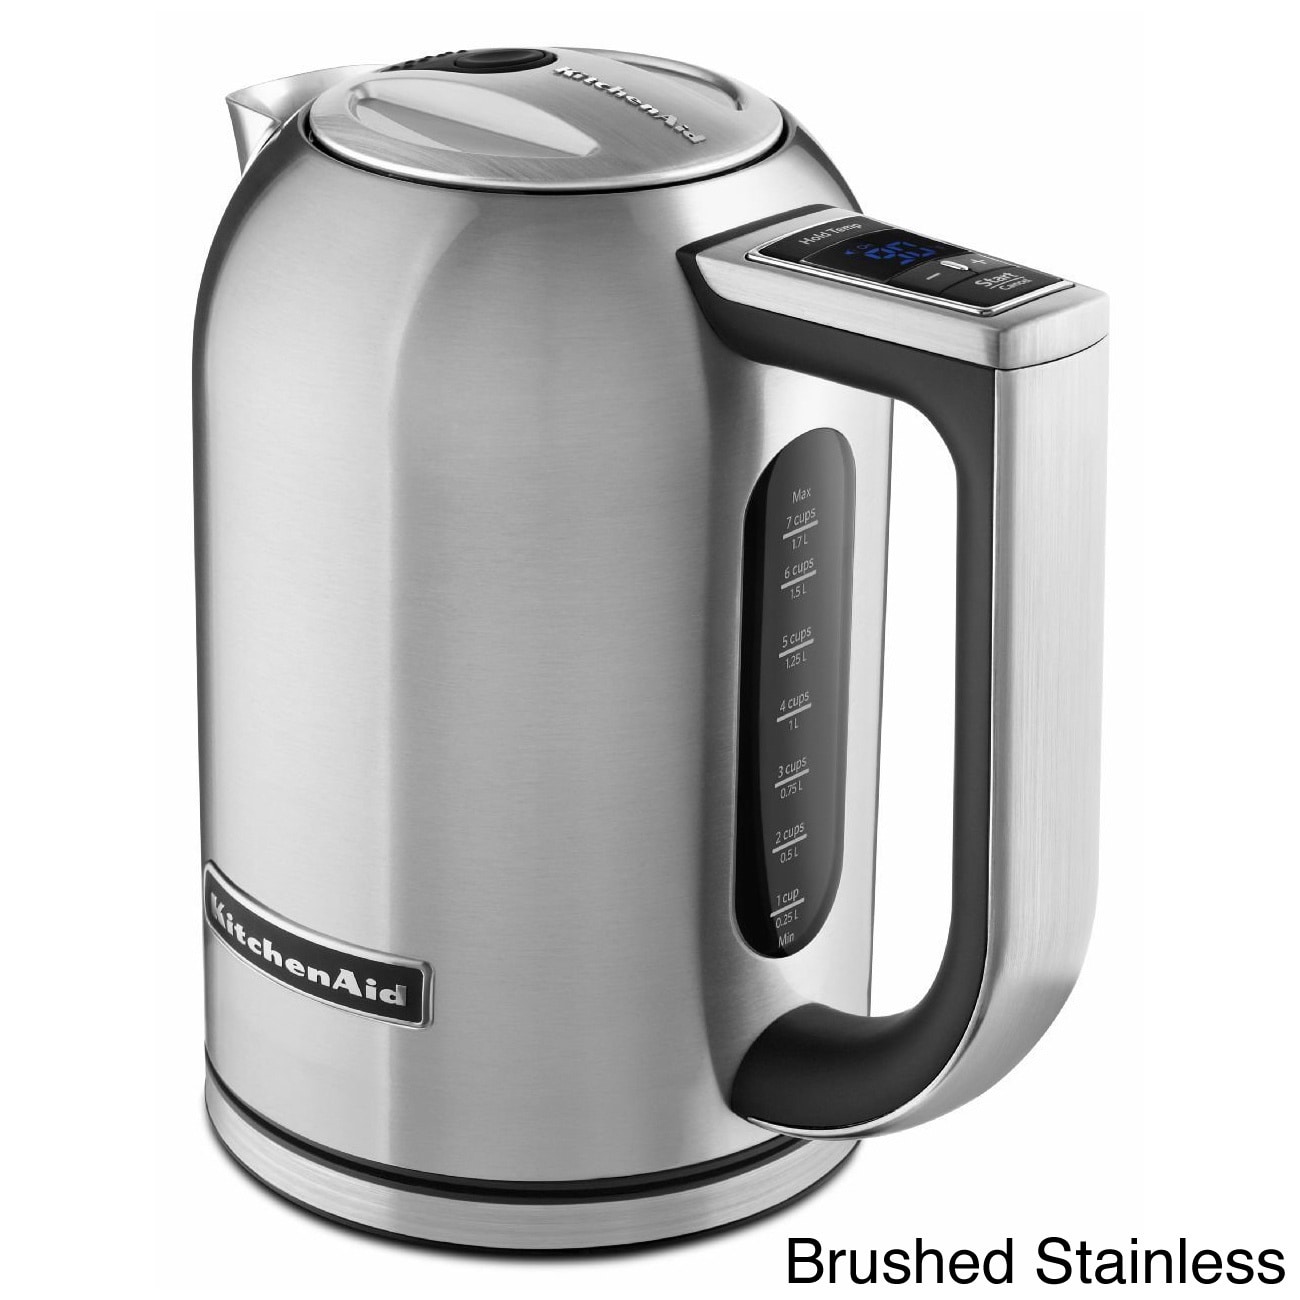 Haden Dorset 1.7L Stainless Steel Electric Kettle - Ivory in 2023